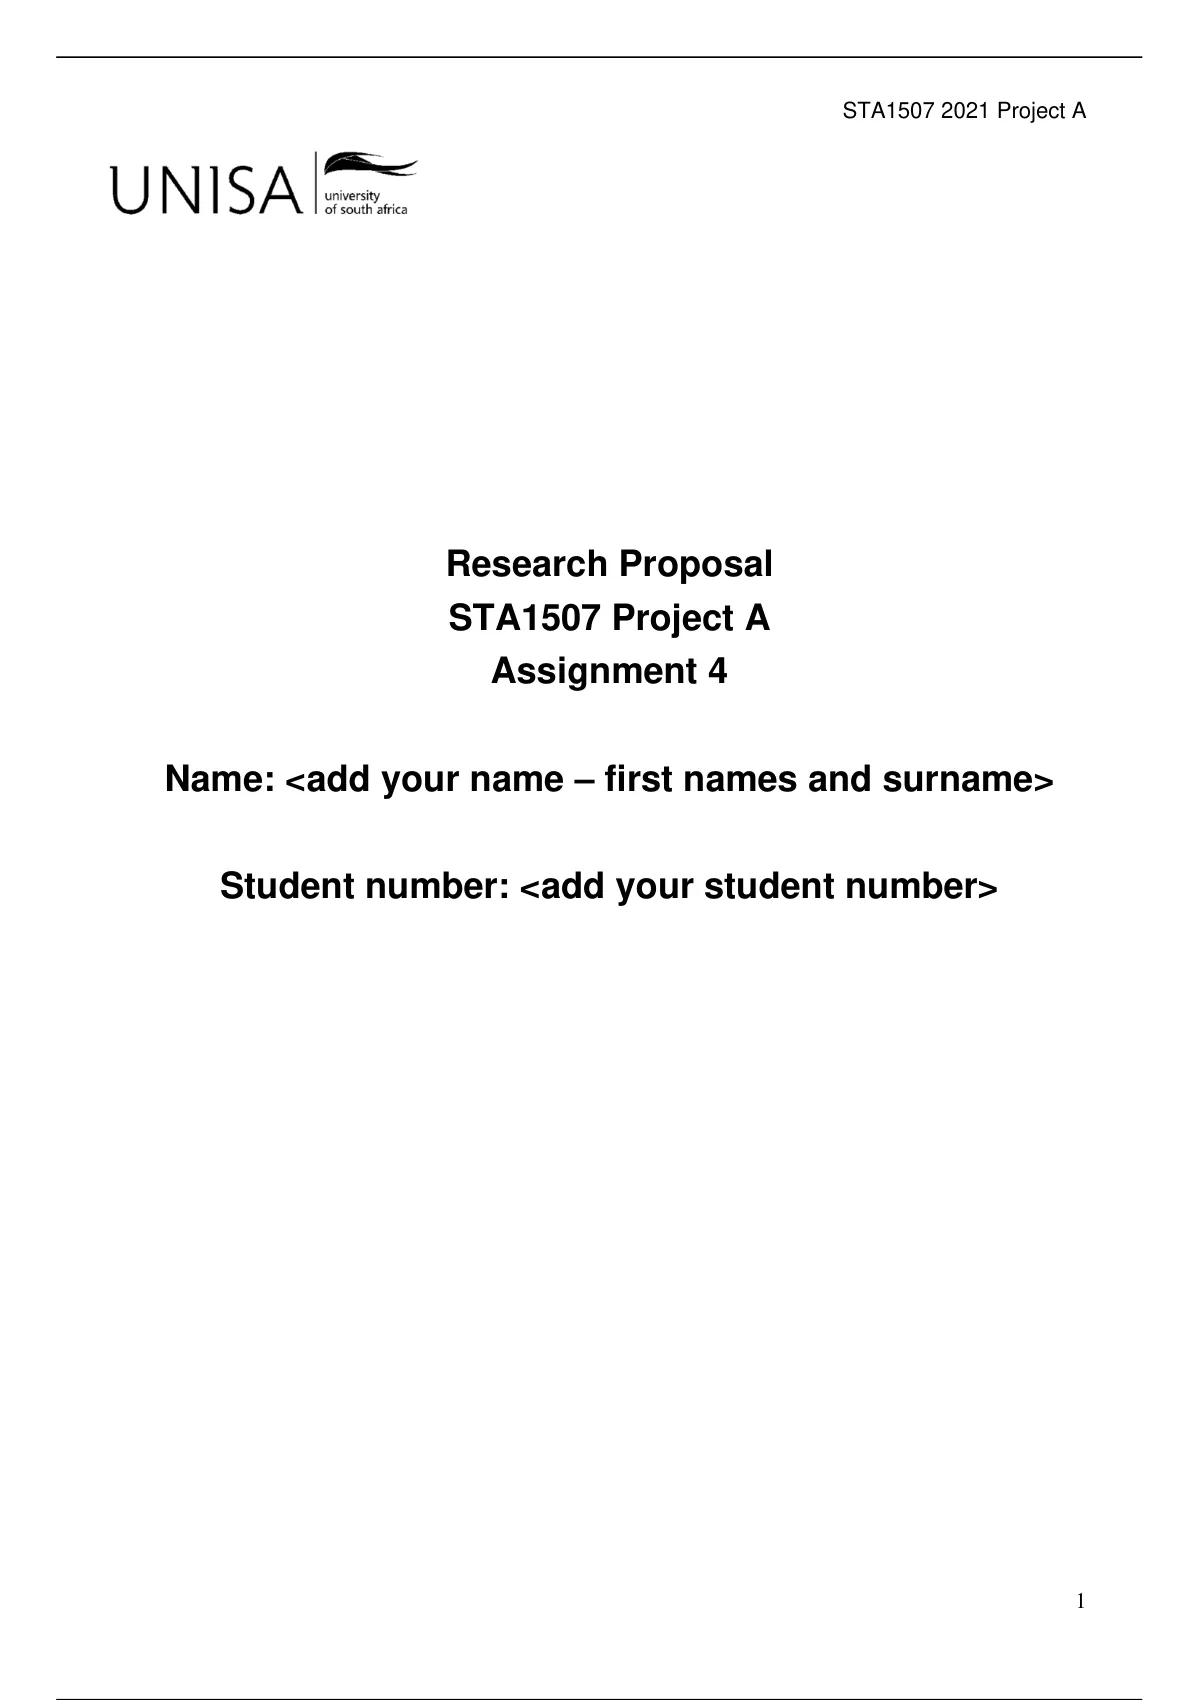 unisa research proposal guidelines